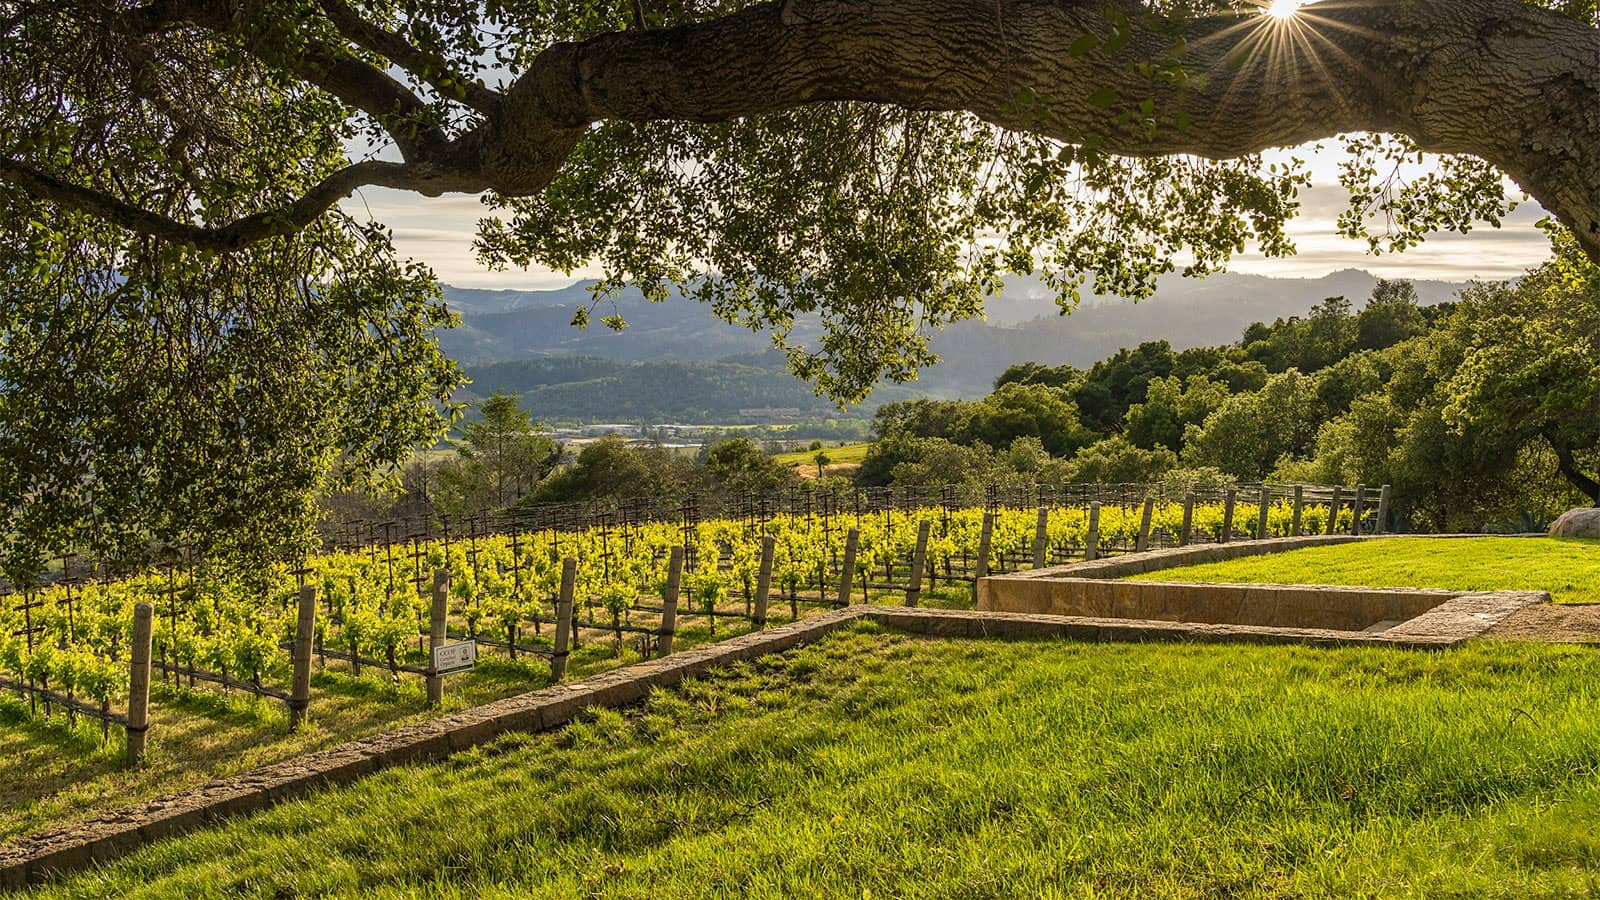 Seven Stones enjoys a hillside view of the upper part of Napa Valley, looking toward the West. (Adam Potts)